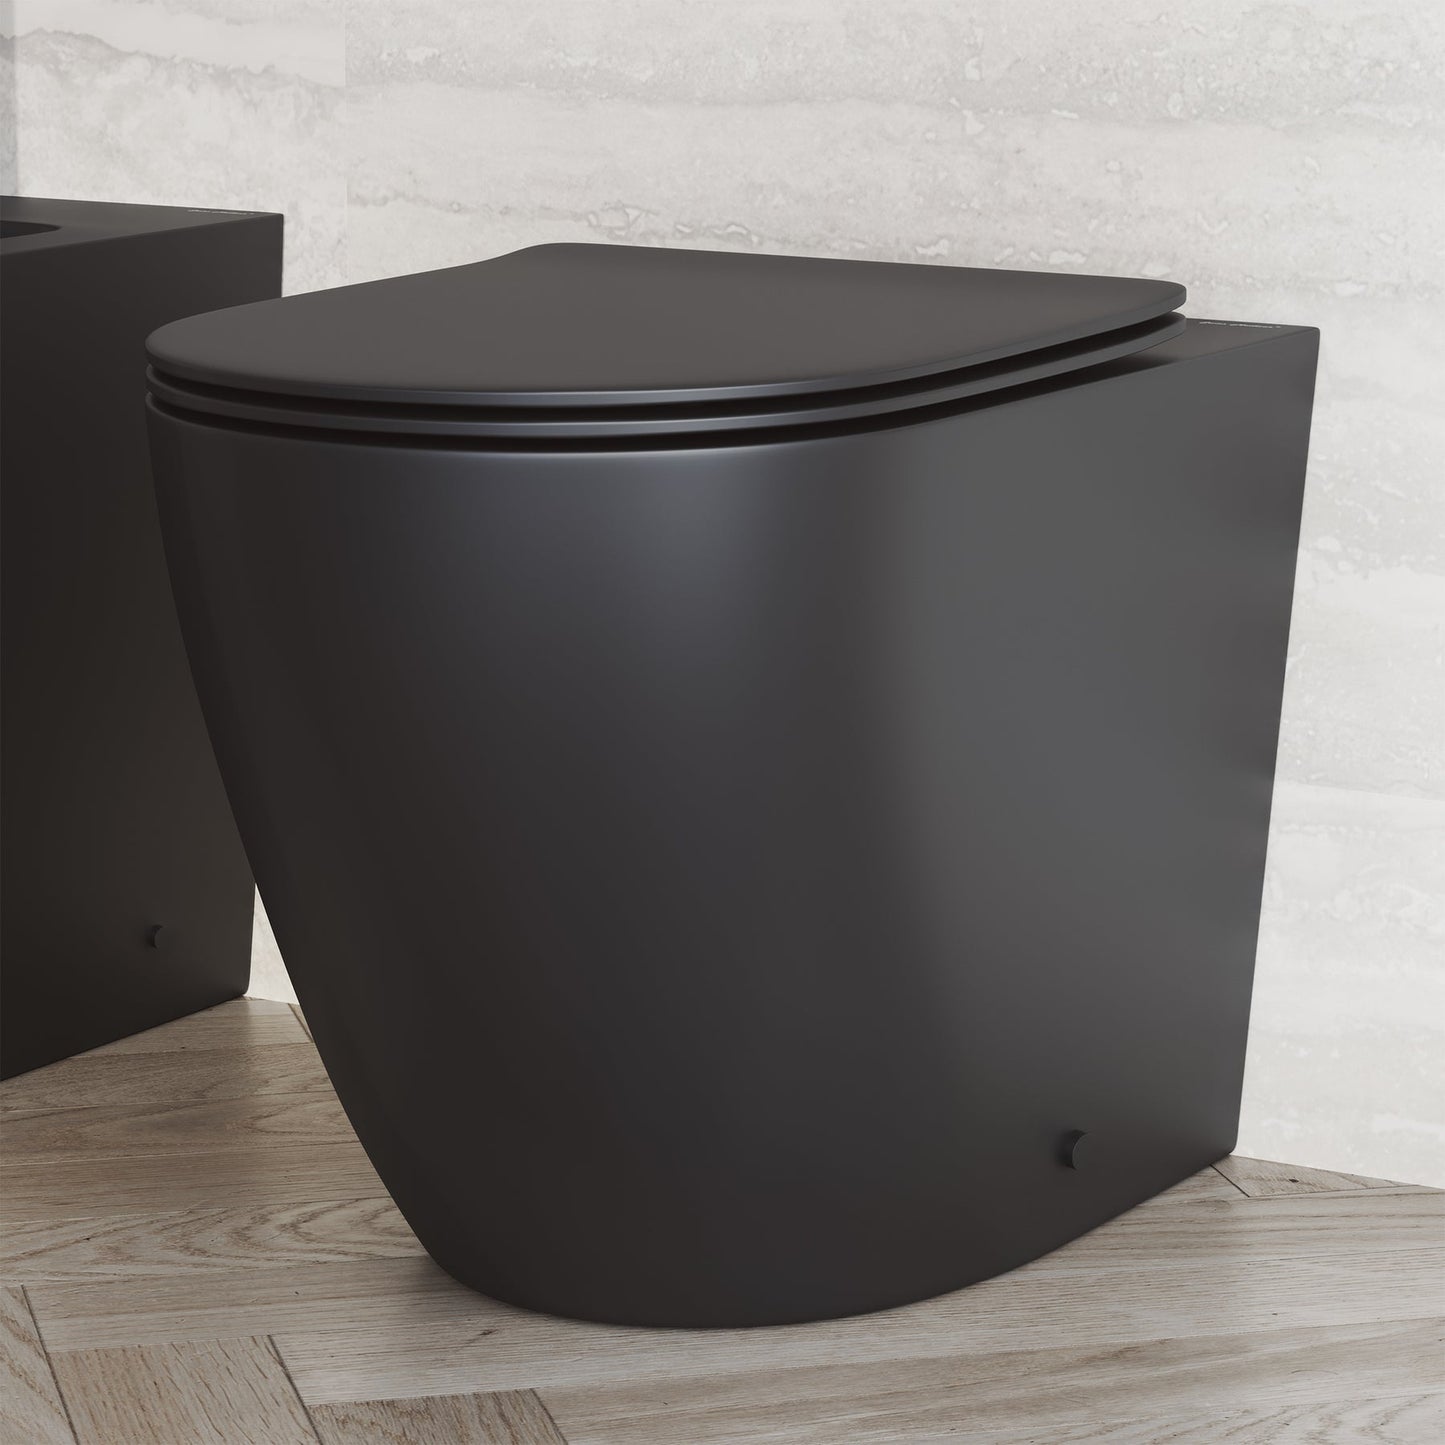 Swiss Madison St. Tropez 14" x 16" Matte Black Back-to-Wall Elongated Floor Mounted Toilet Bowl